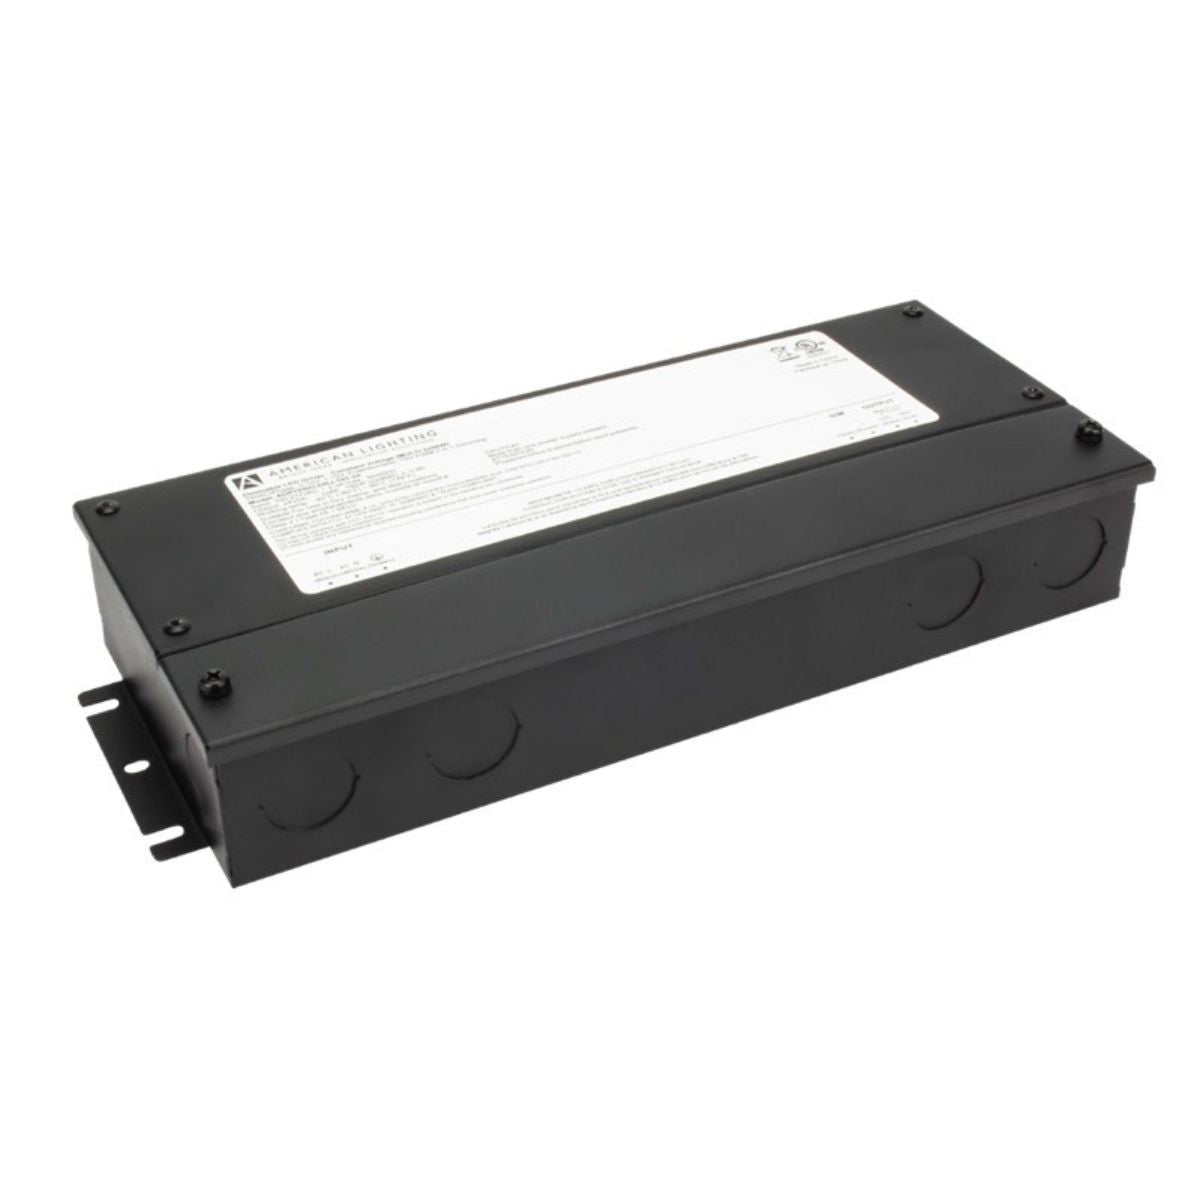 Adaptive Pro 24V DC 192 Watts 100-277V AC Input Dimmable LED Driver